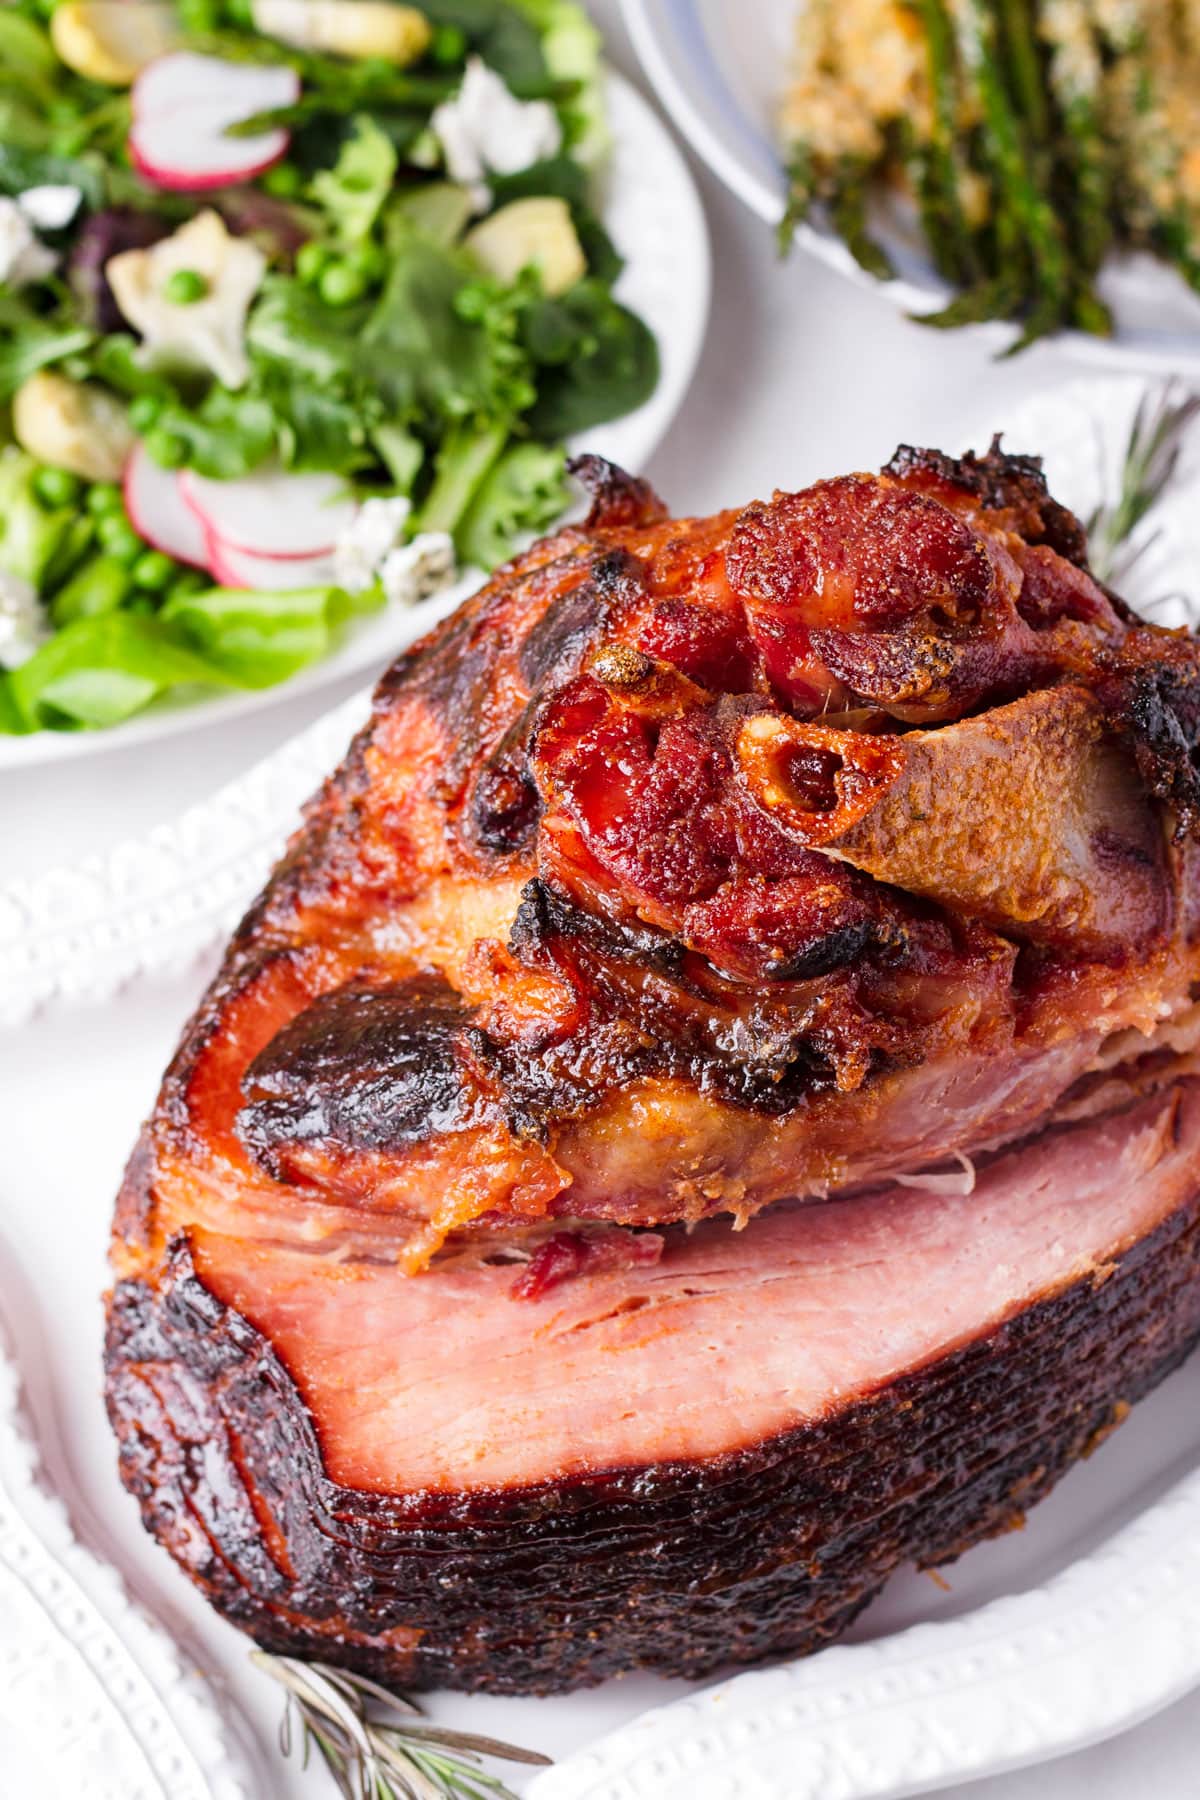 a whole roasted Easter glazed ham with salad side dishes in the back